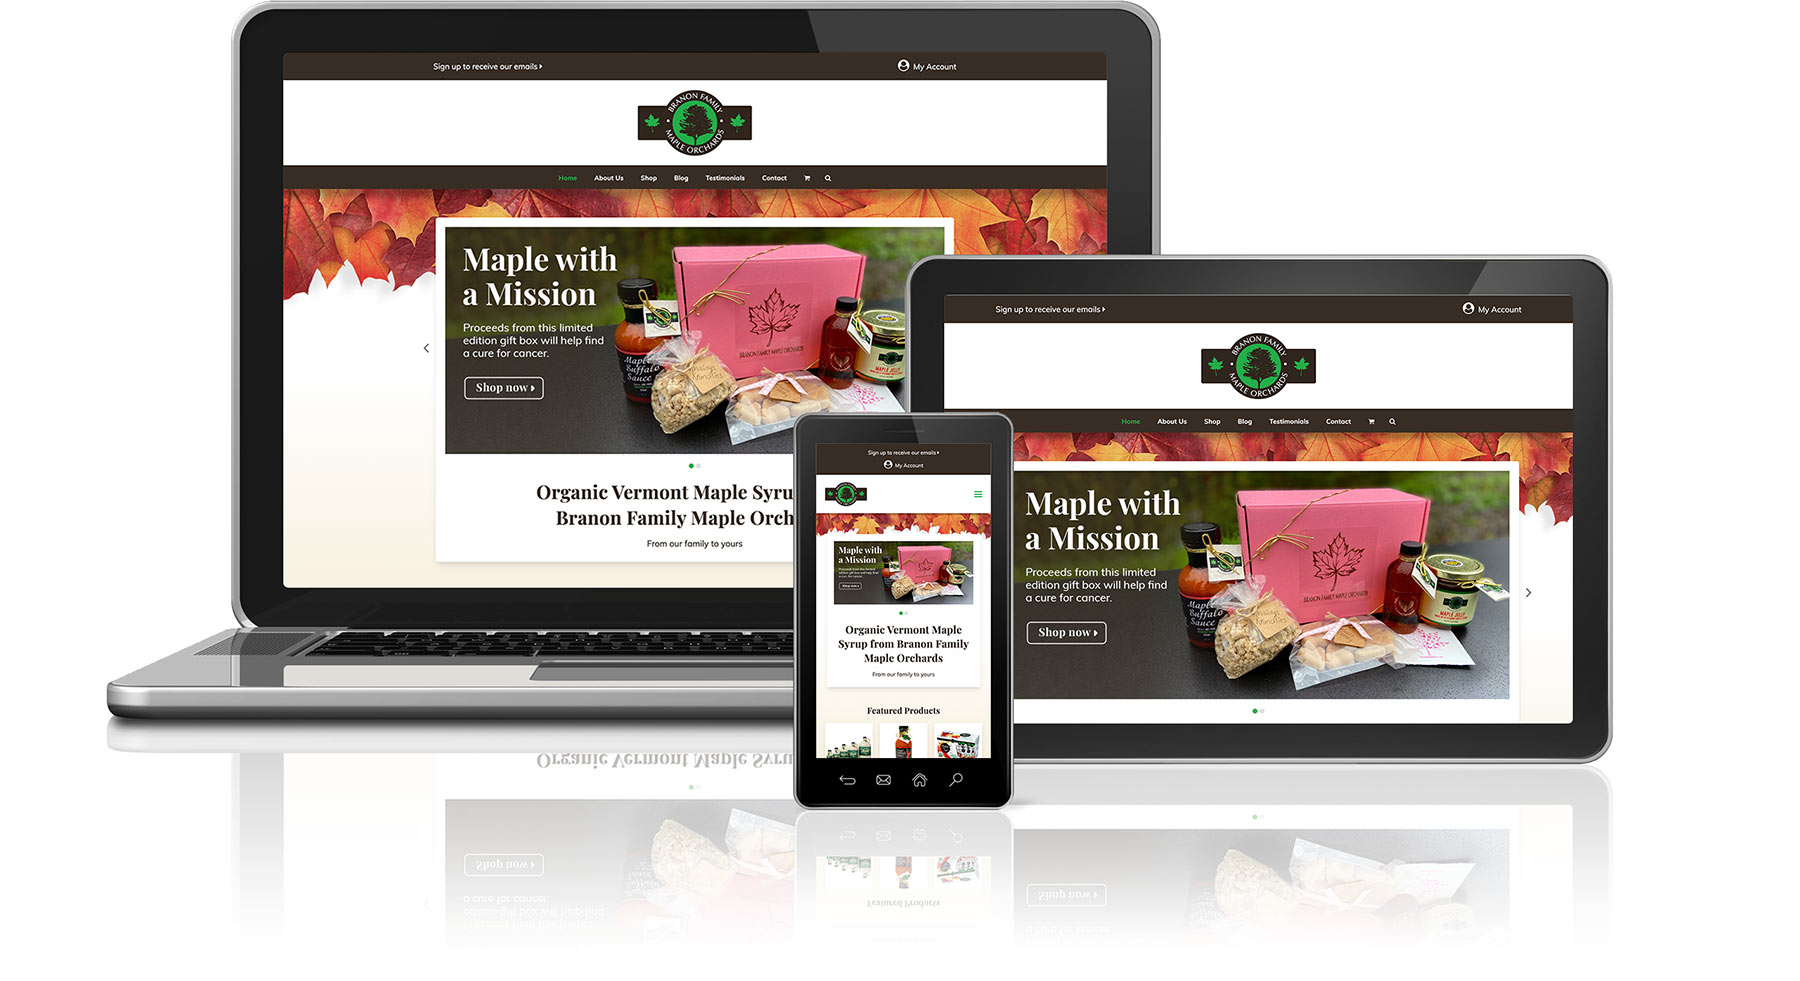 Graphic showing Branon Family Maple Orchards website on laptop, tablet, and smart phone